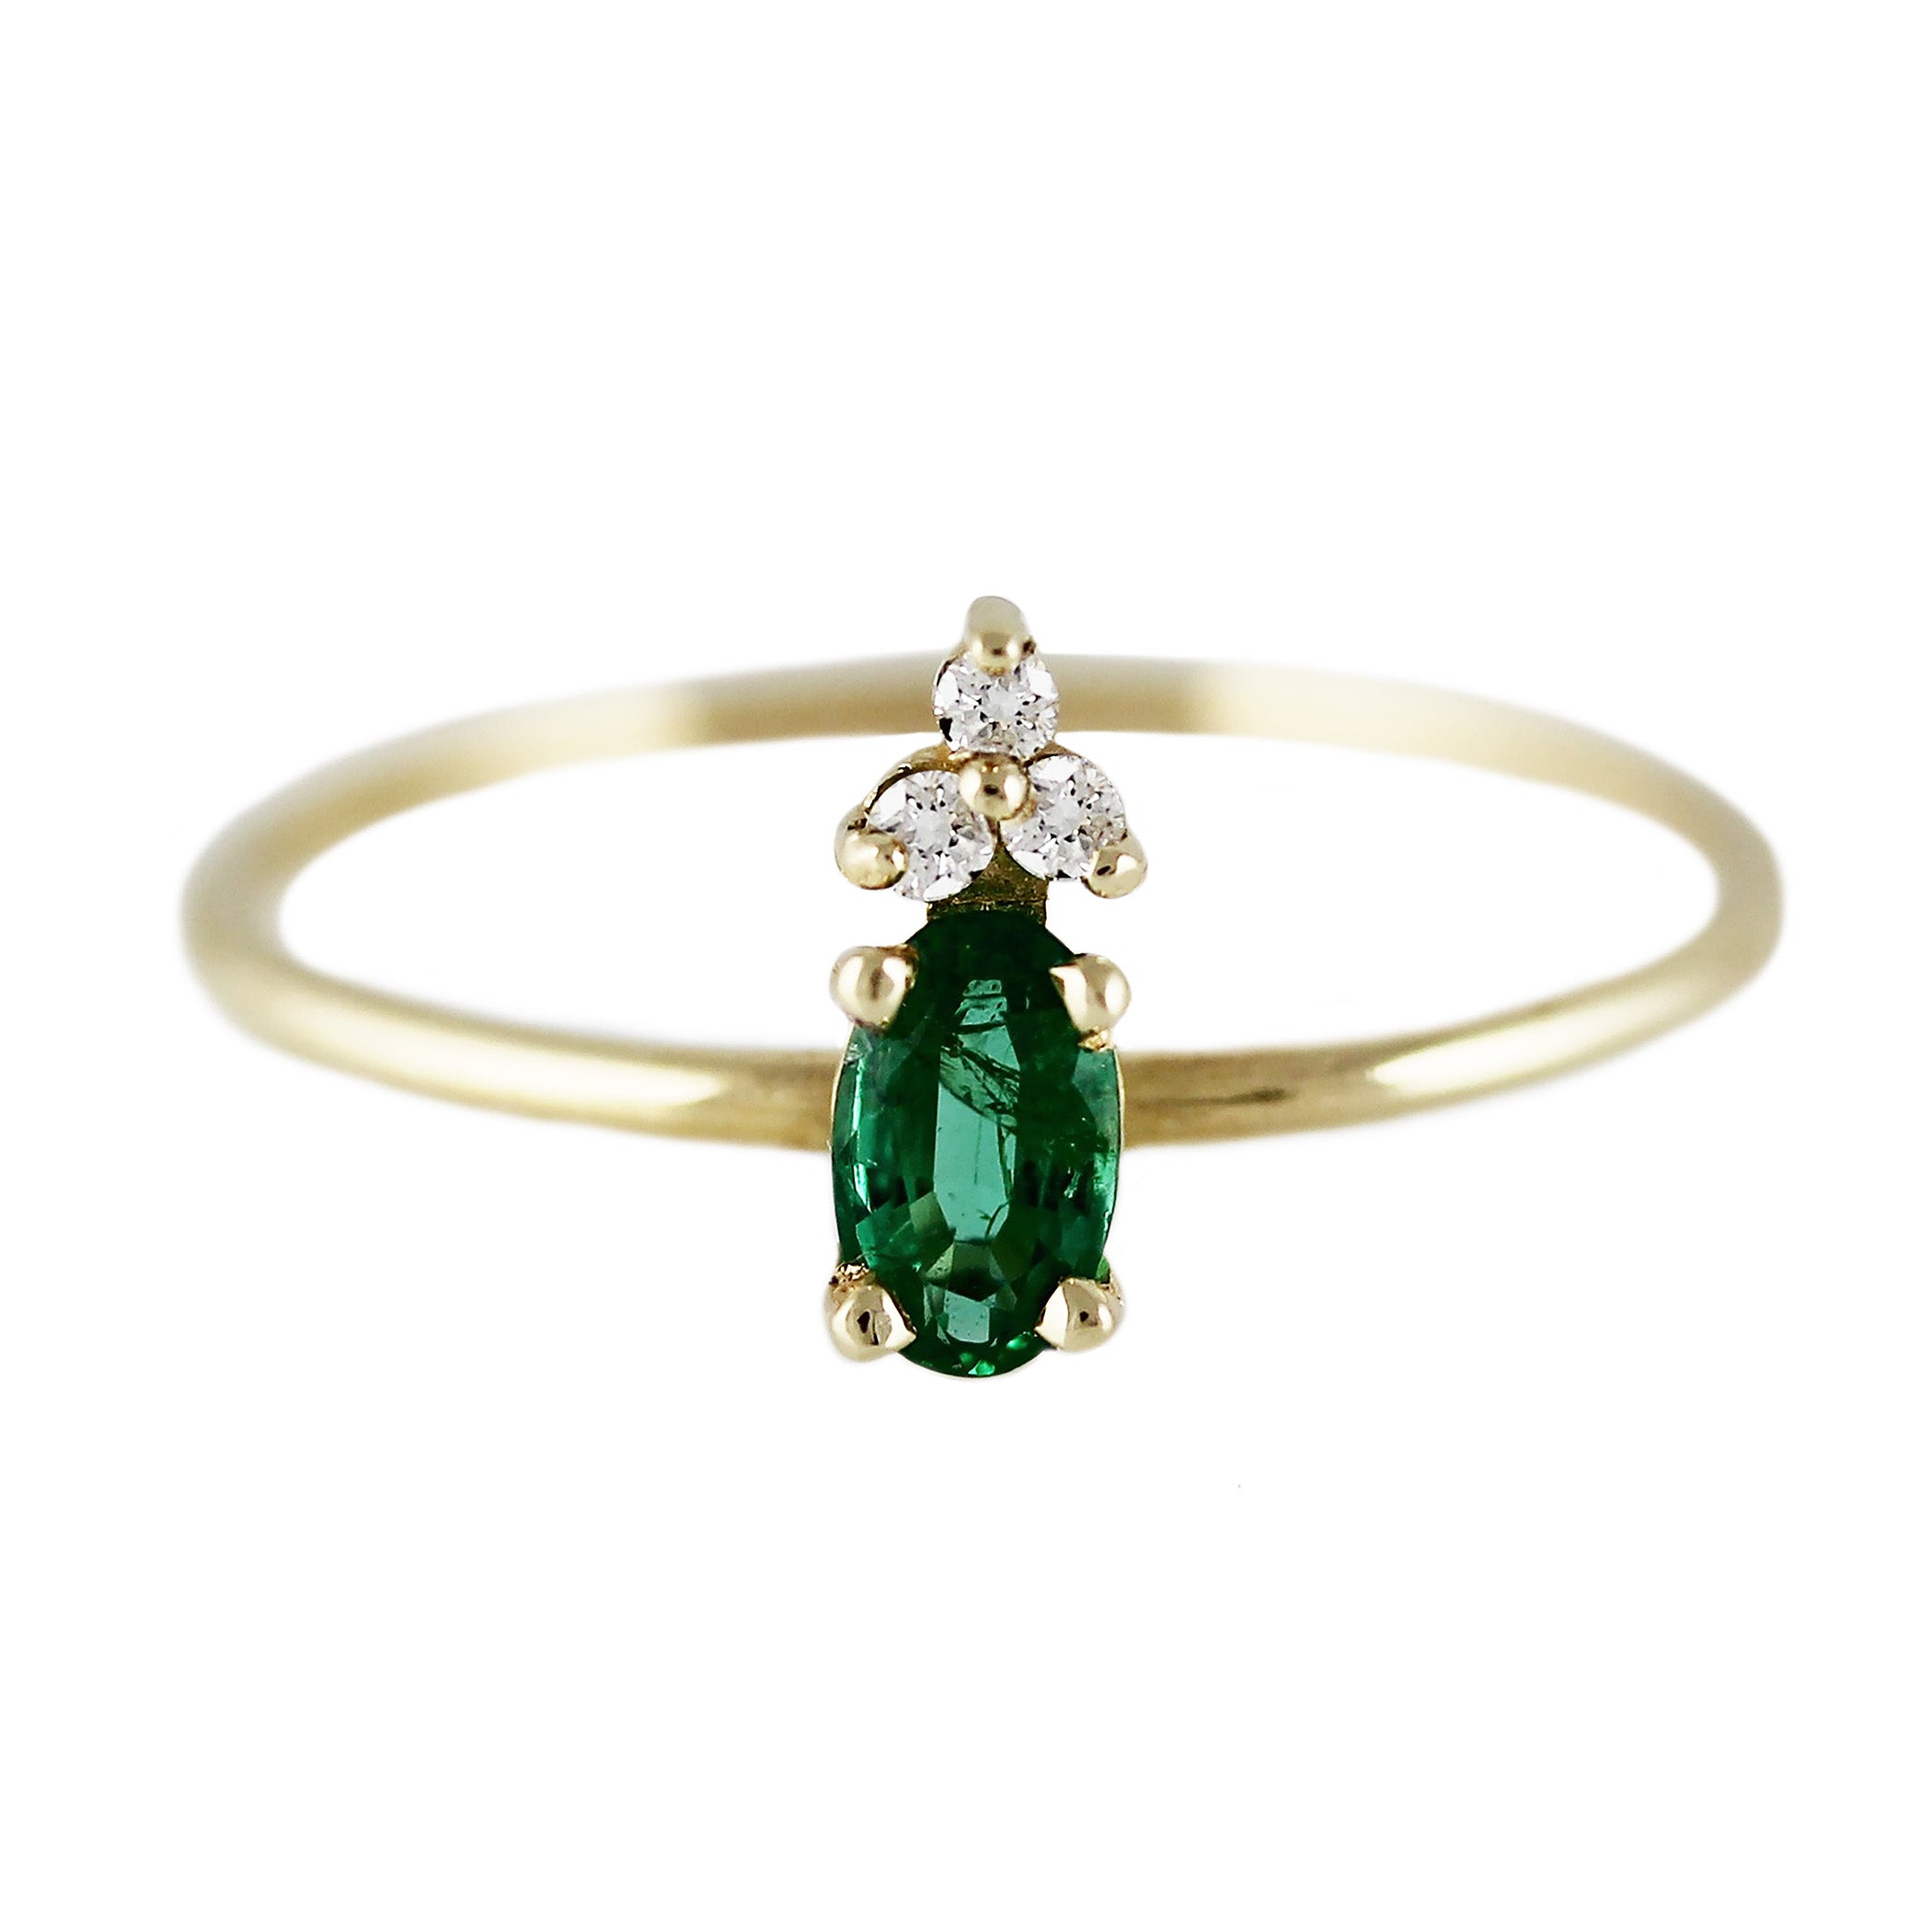 LOUISE EMERALD RING